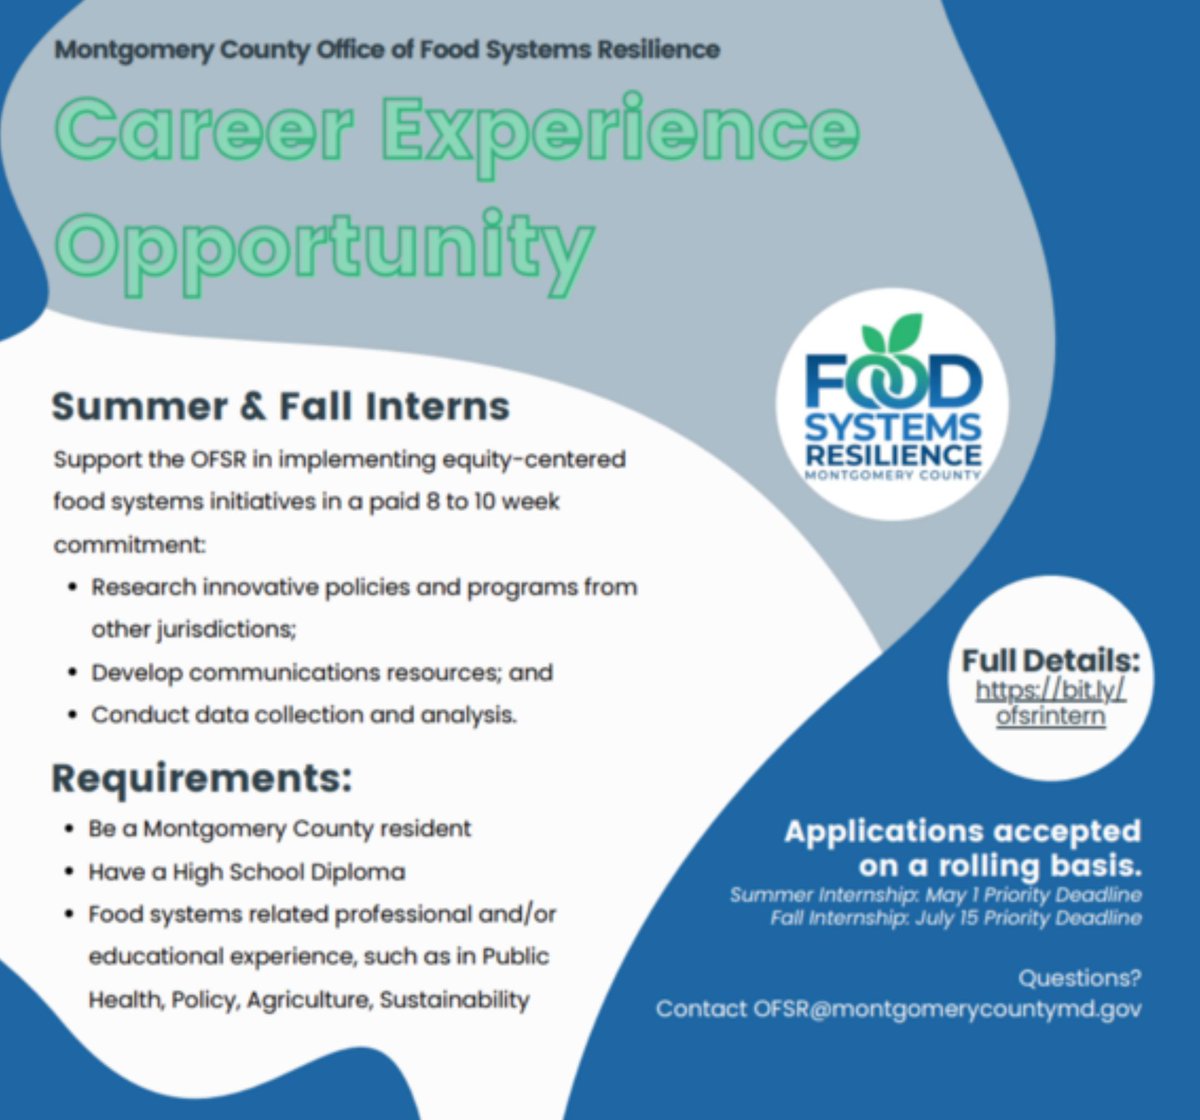 The County’s Office of Food Systems Resilience is seeking interns for the summer and fall. Share this opportunity with a Montgomery County resident with a high school diploma and interest/experience in food systems! More: bit.ly/ofsrintern